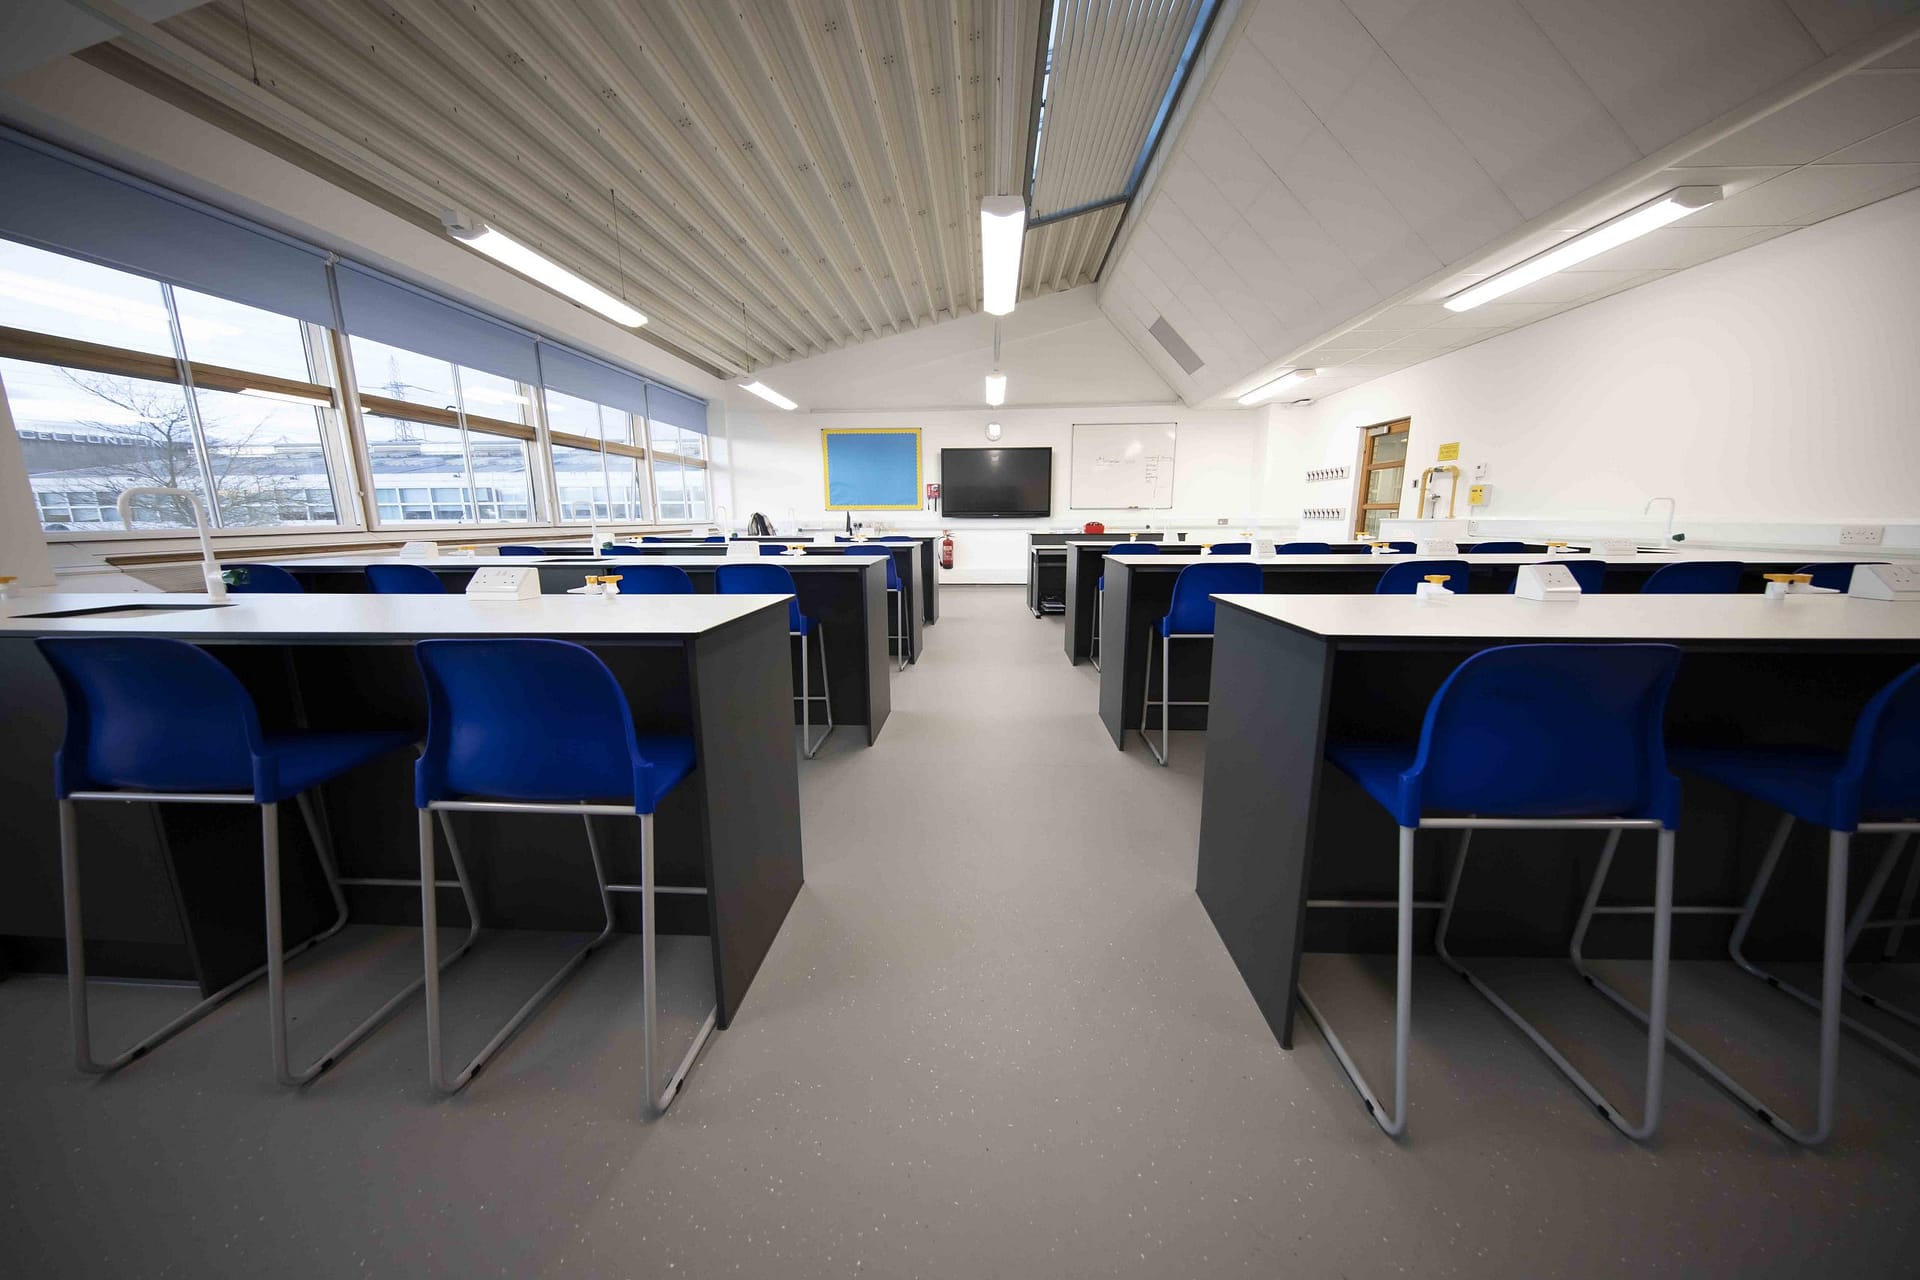 Royal Docks Academy – New facilities for the secondary school students